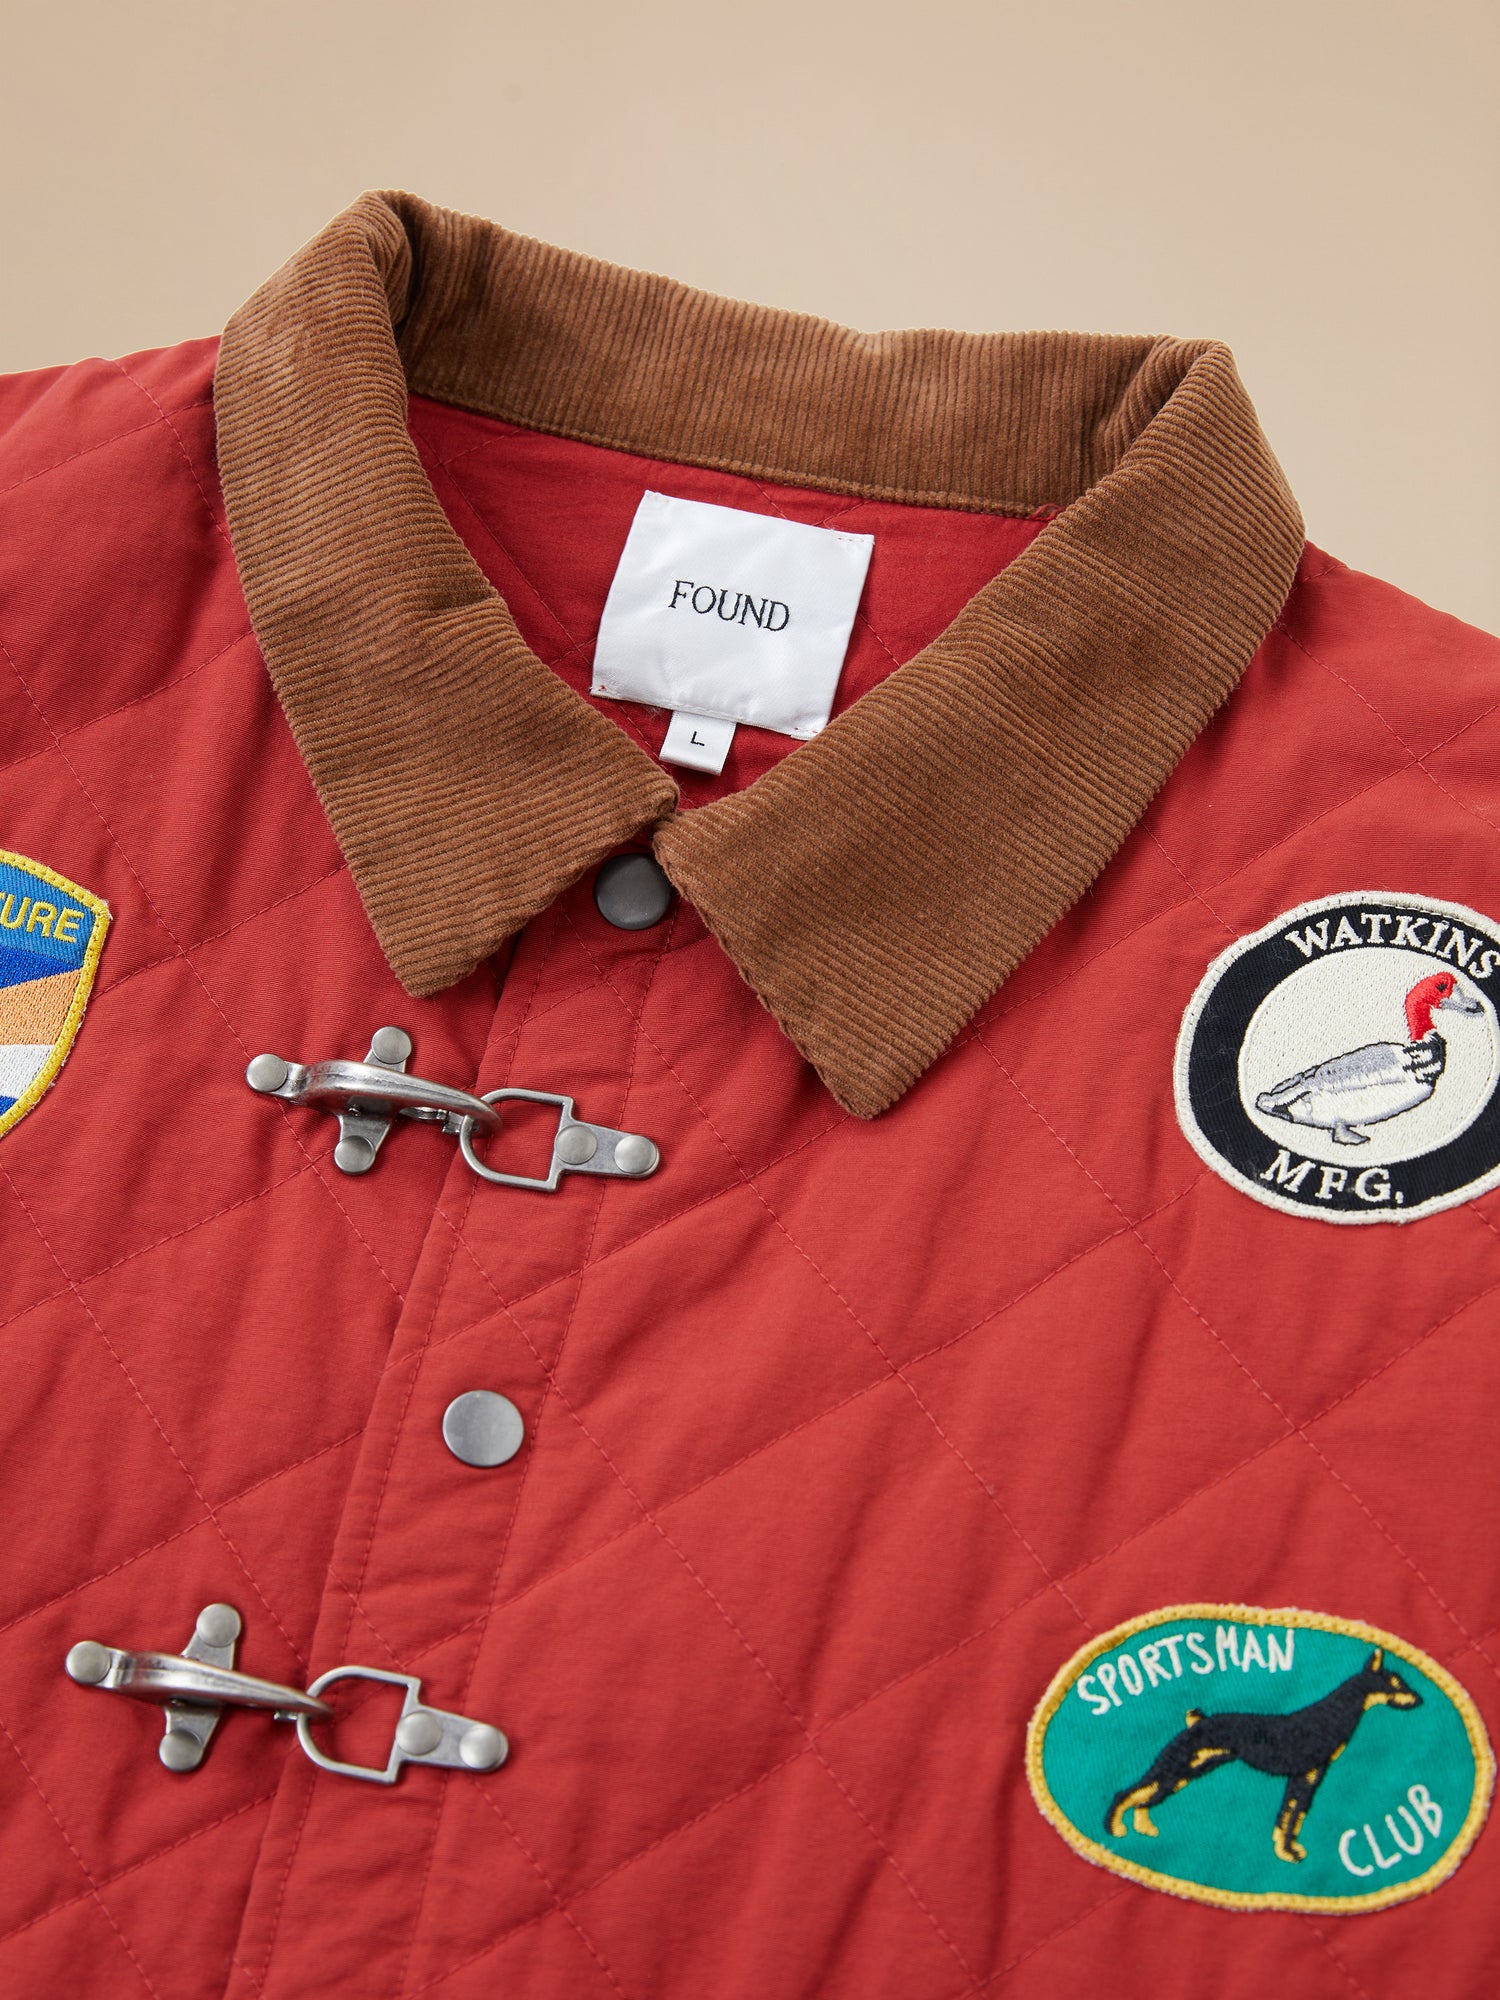 A red Farmstead Quilt Patch Jacket from Found with patches on it.